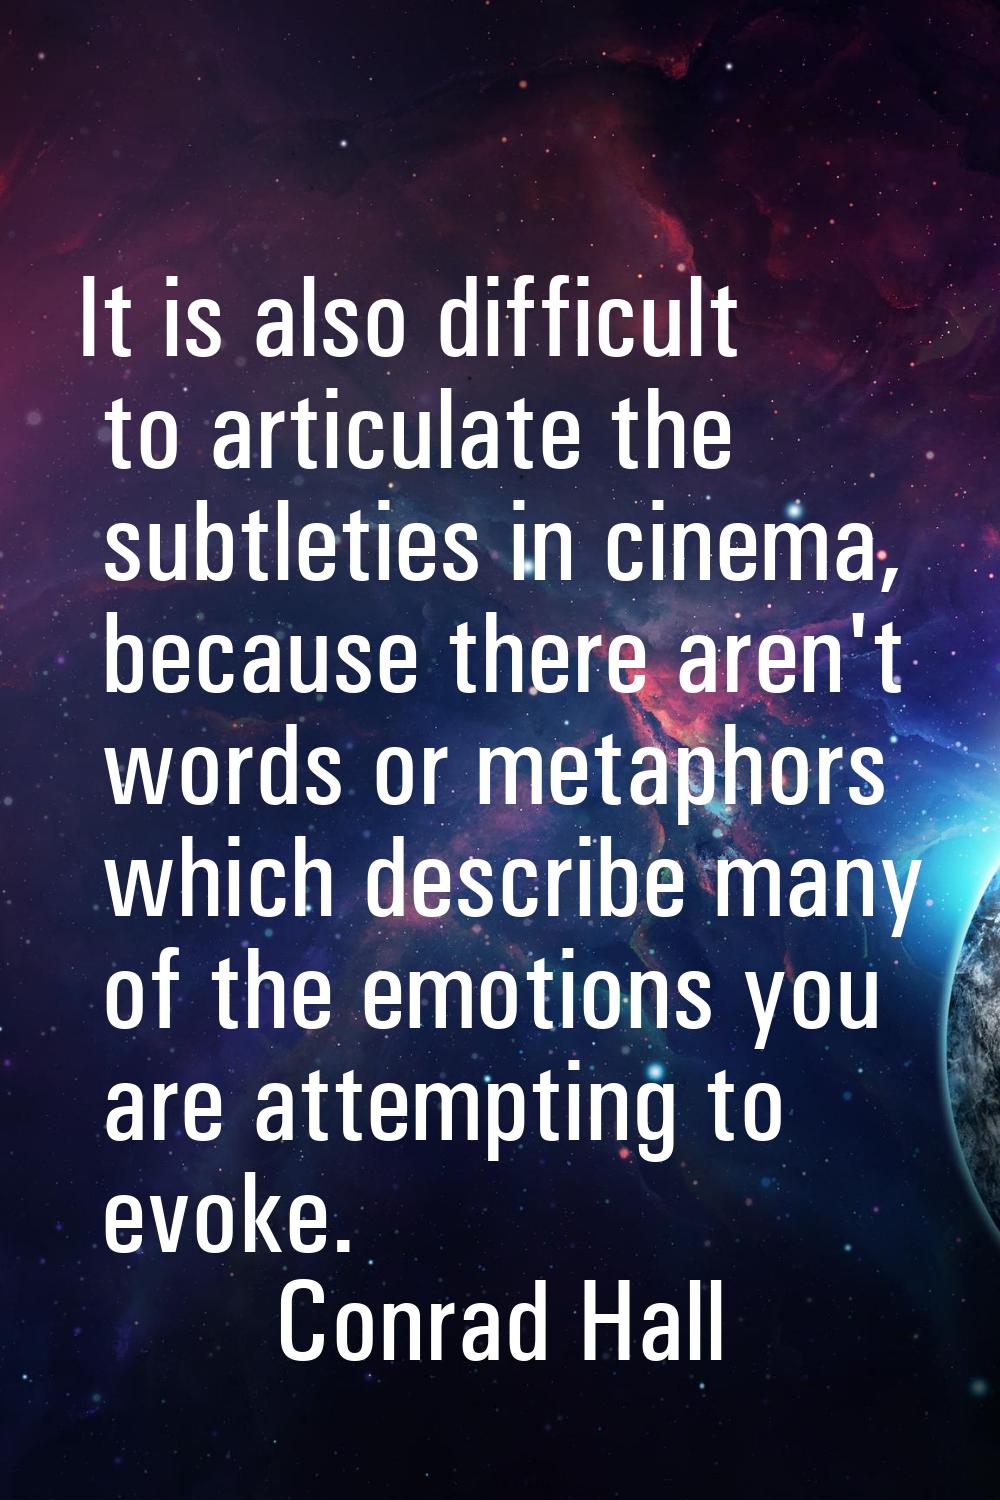 It is also difficult to articulate the subtleties in cinema, because there aren't words or metaphor